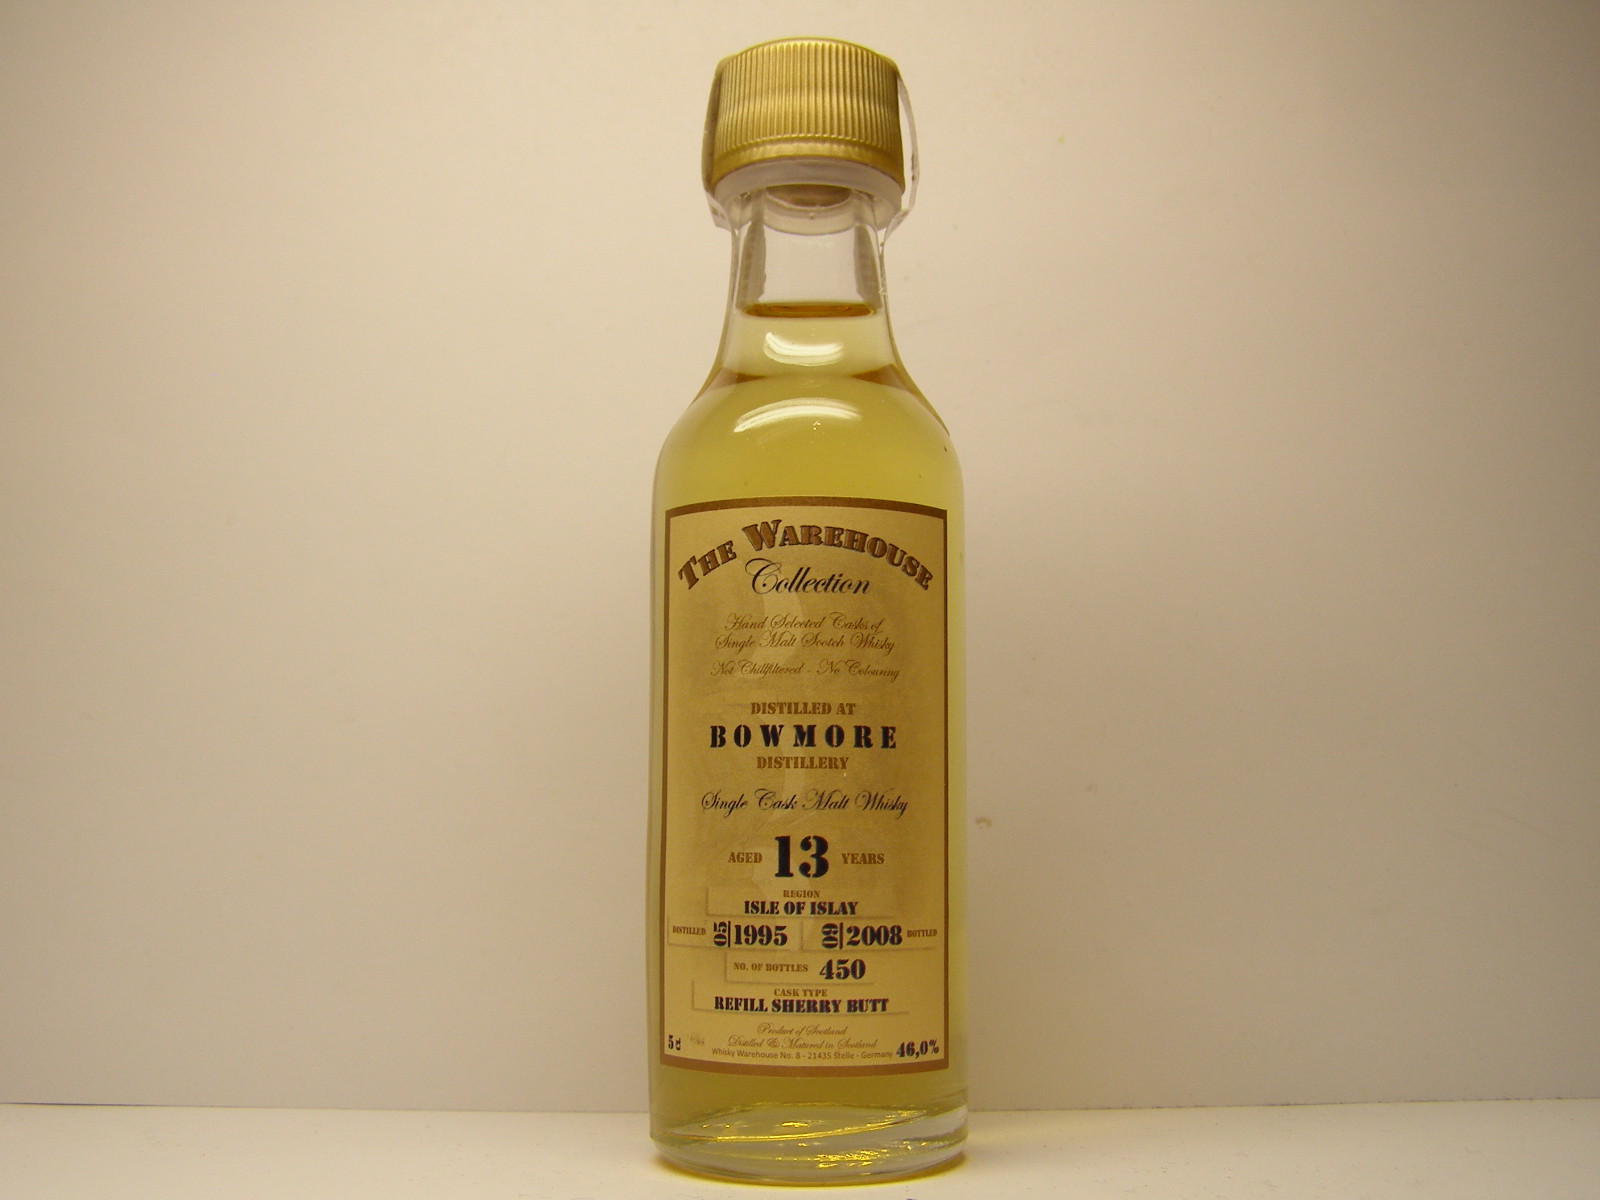 SCMW 13yo 1995-2008 "The Warehouse Collection" 5cl 46%